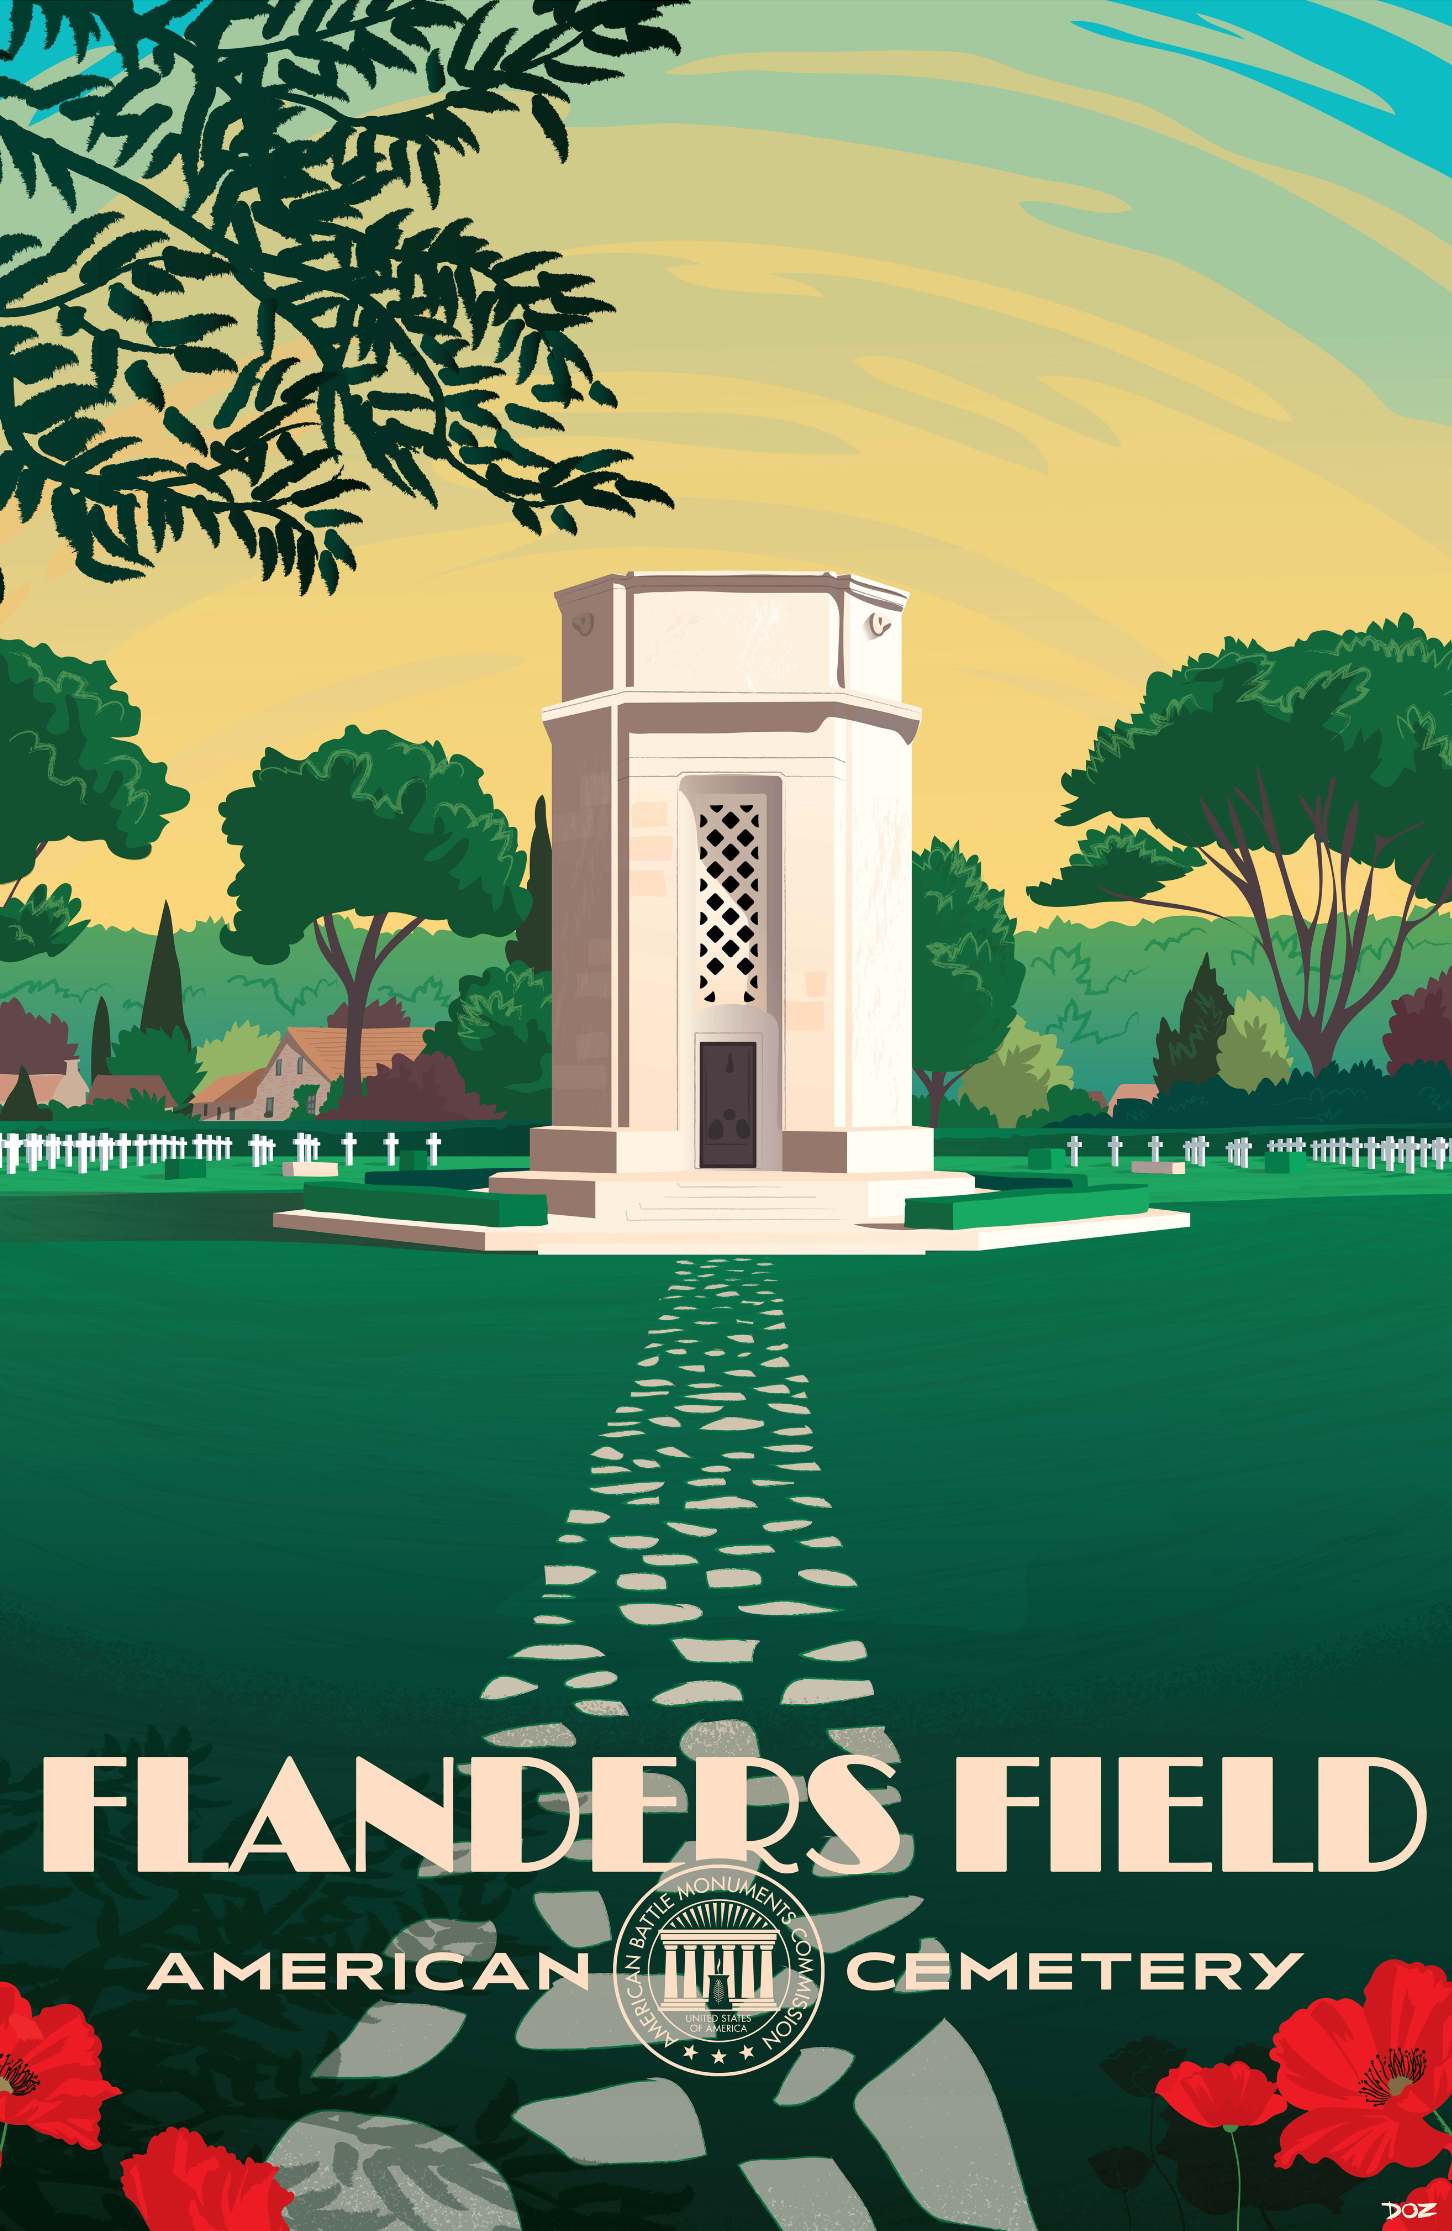 Vintage poster of Flanders Field American Cemetery created to mark ABMC Centennial